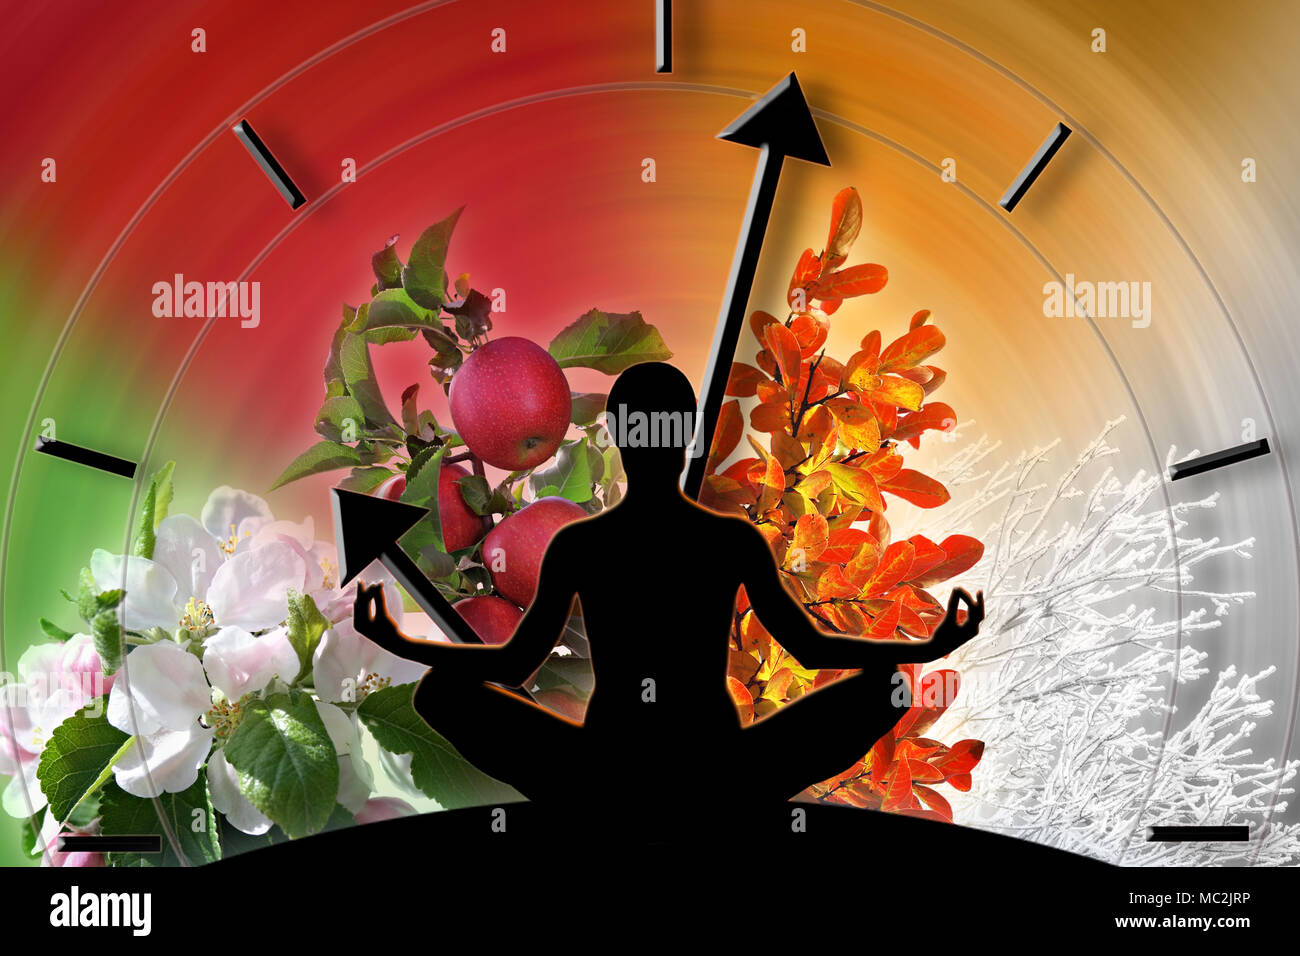 Female yoga figure against collage of pictures representing four seasons of the year. Circle of life concept. Stock Photo